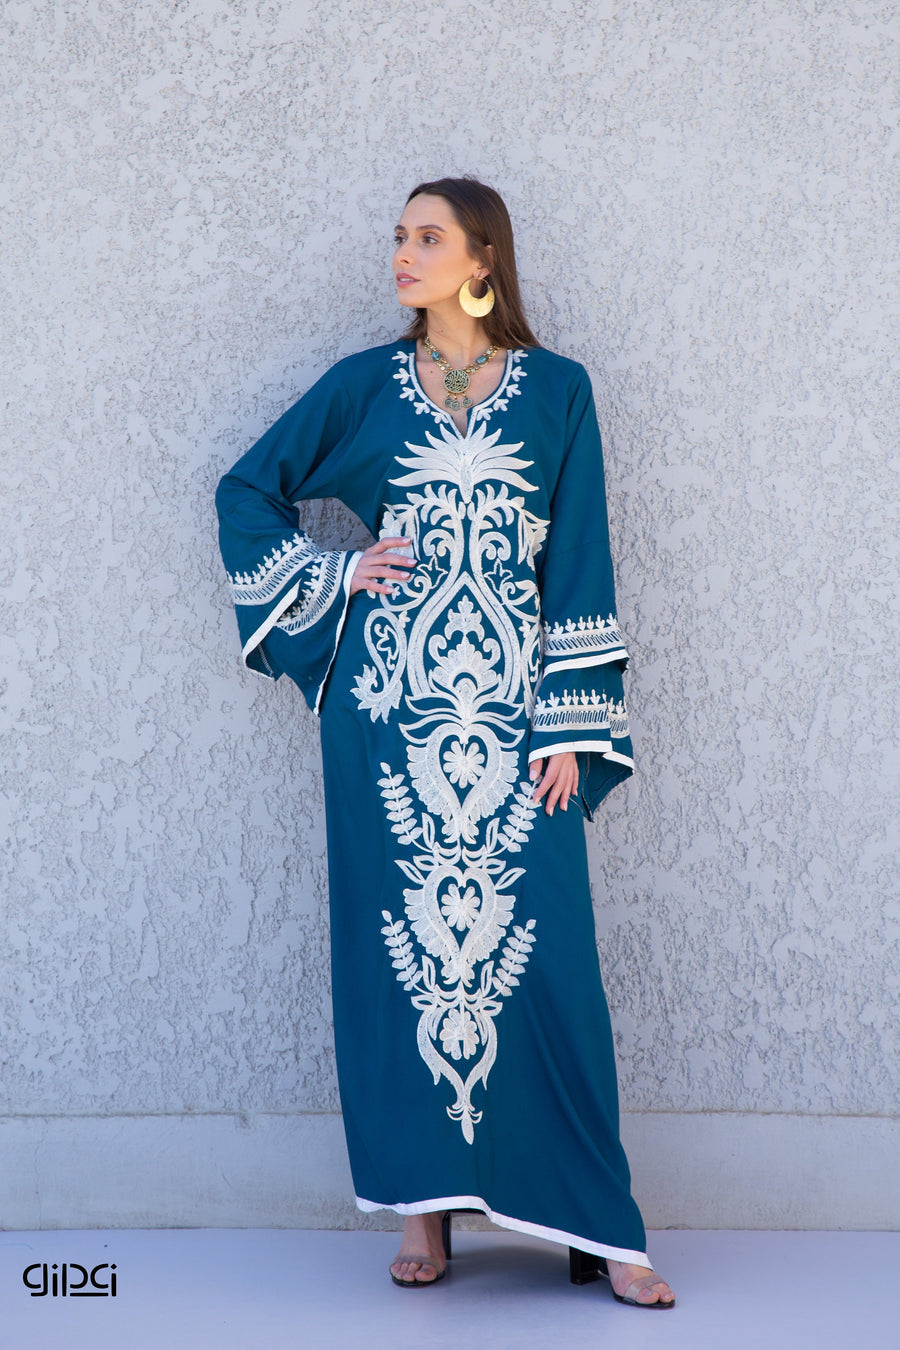 Flared sleeves blue cotton Caftan, wide sleeve caftan for women, embroidered Caftan dress, Caftan maxi dress, Caftans for women, Caftans